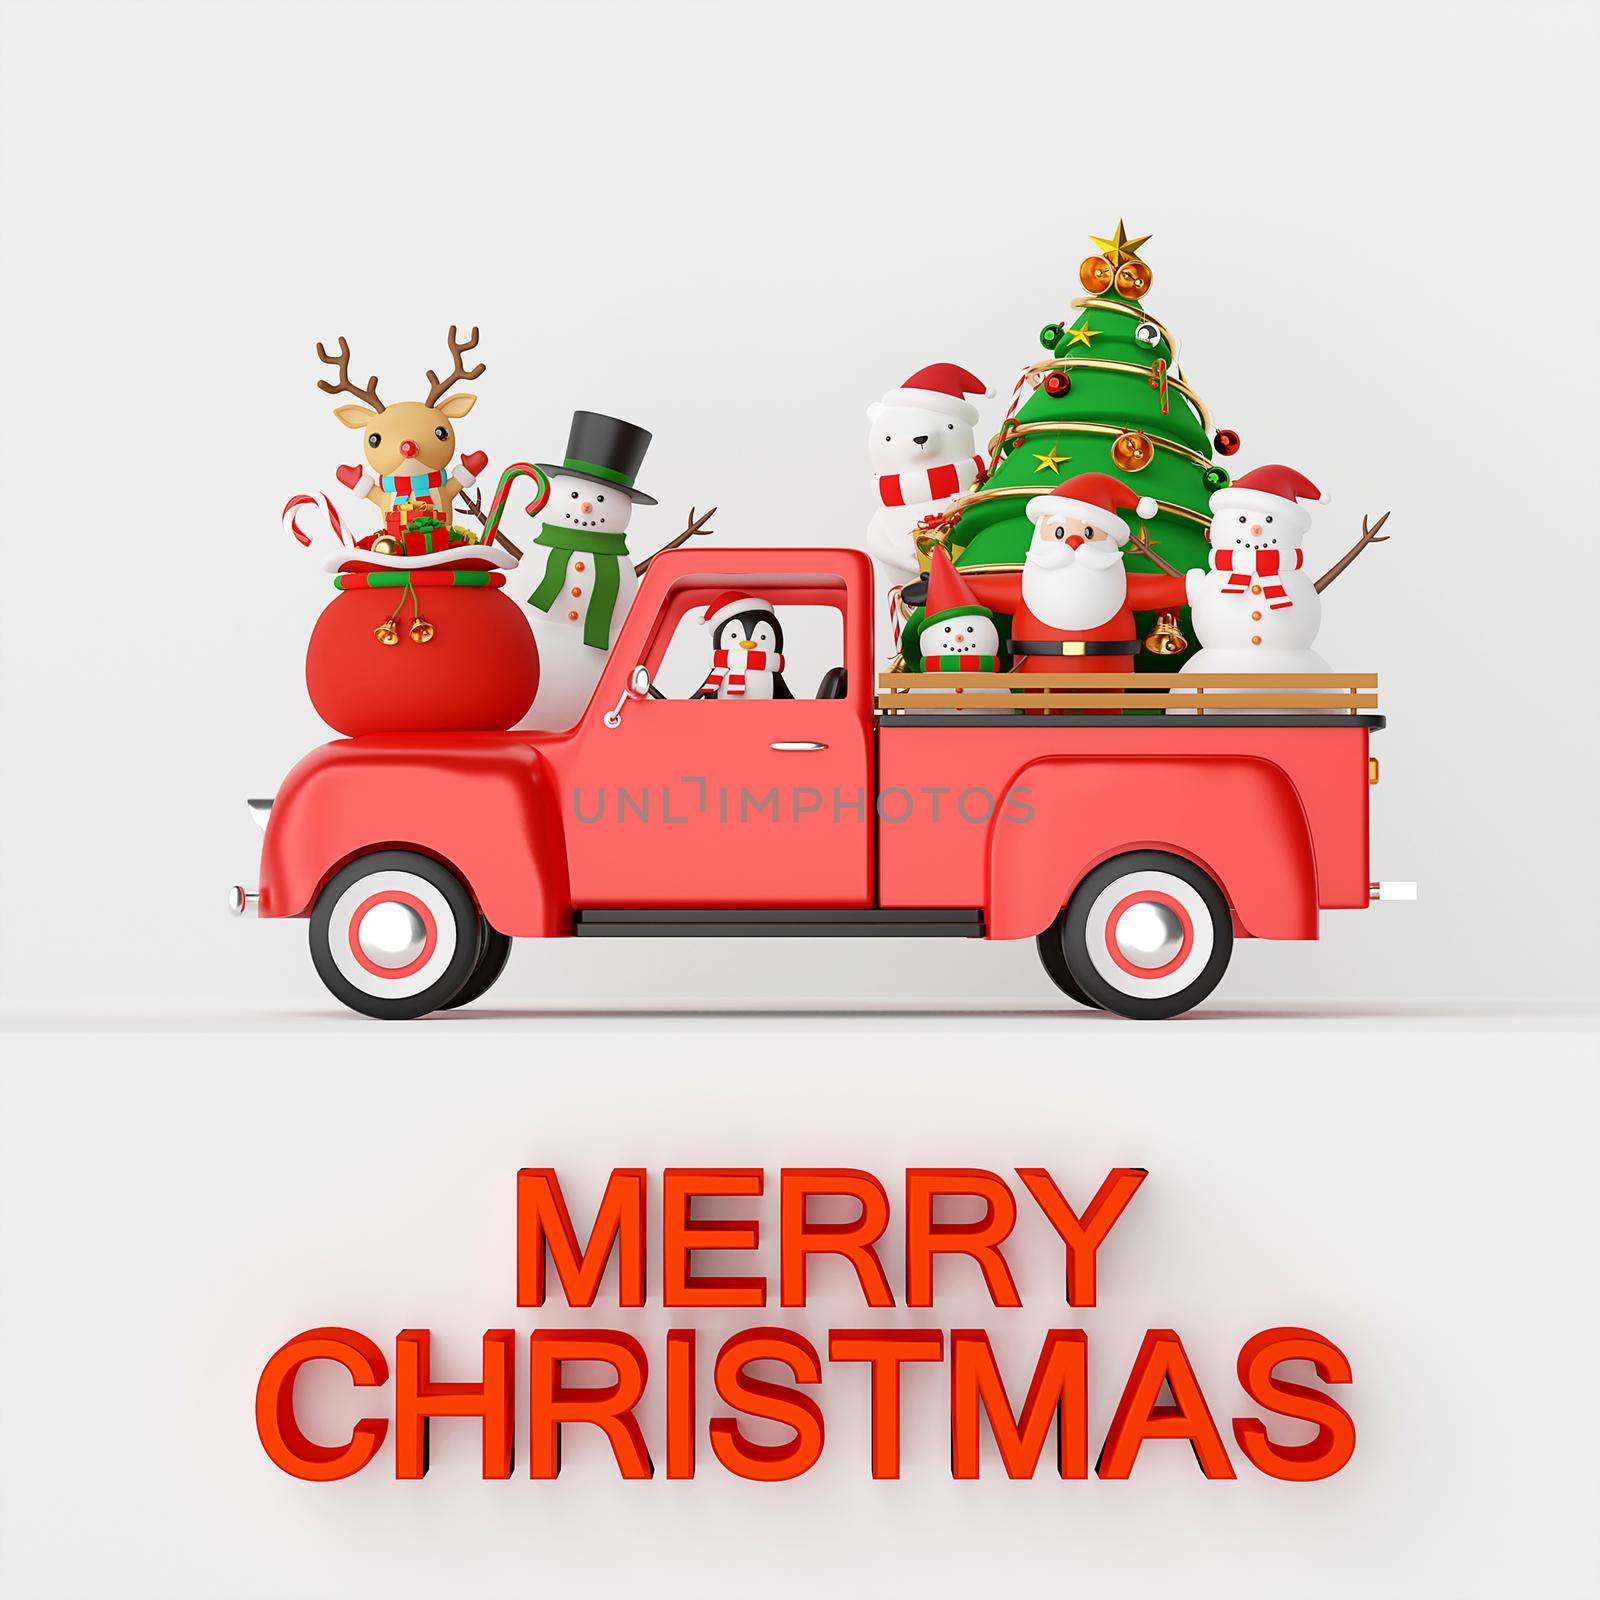 Merry Christmas and Happy New Year, Christmas celebration with Santa Claus and friends on Christmas truck, 3d rendering